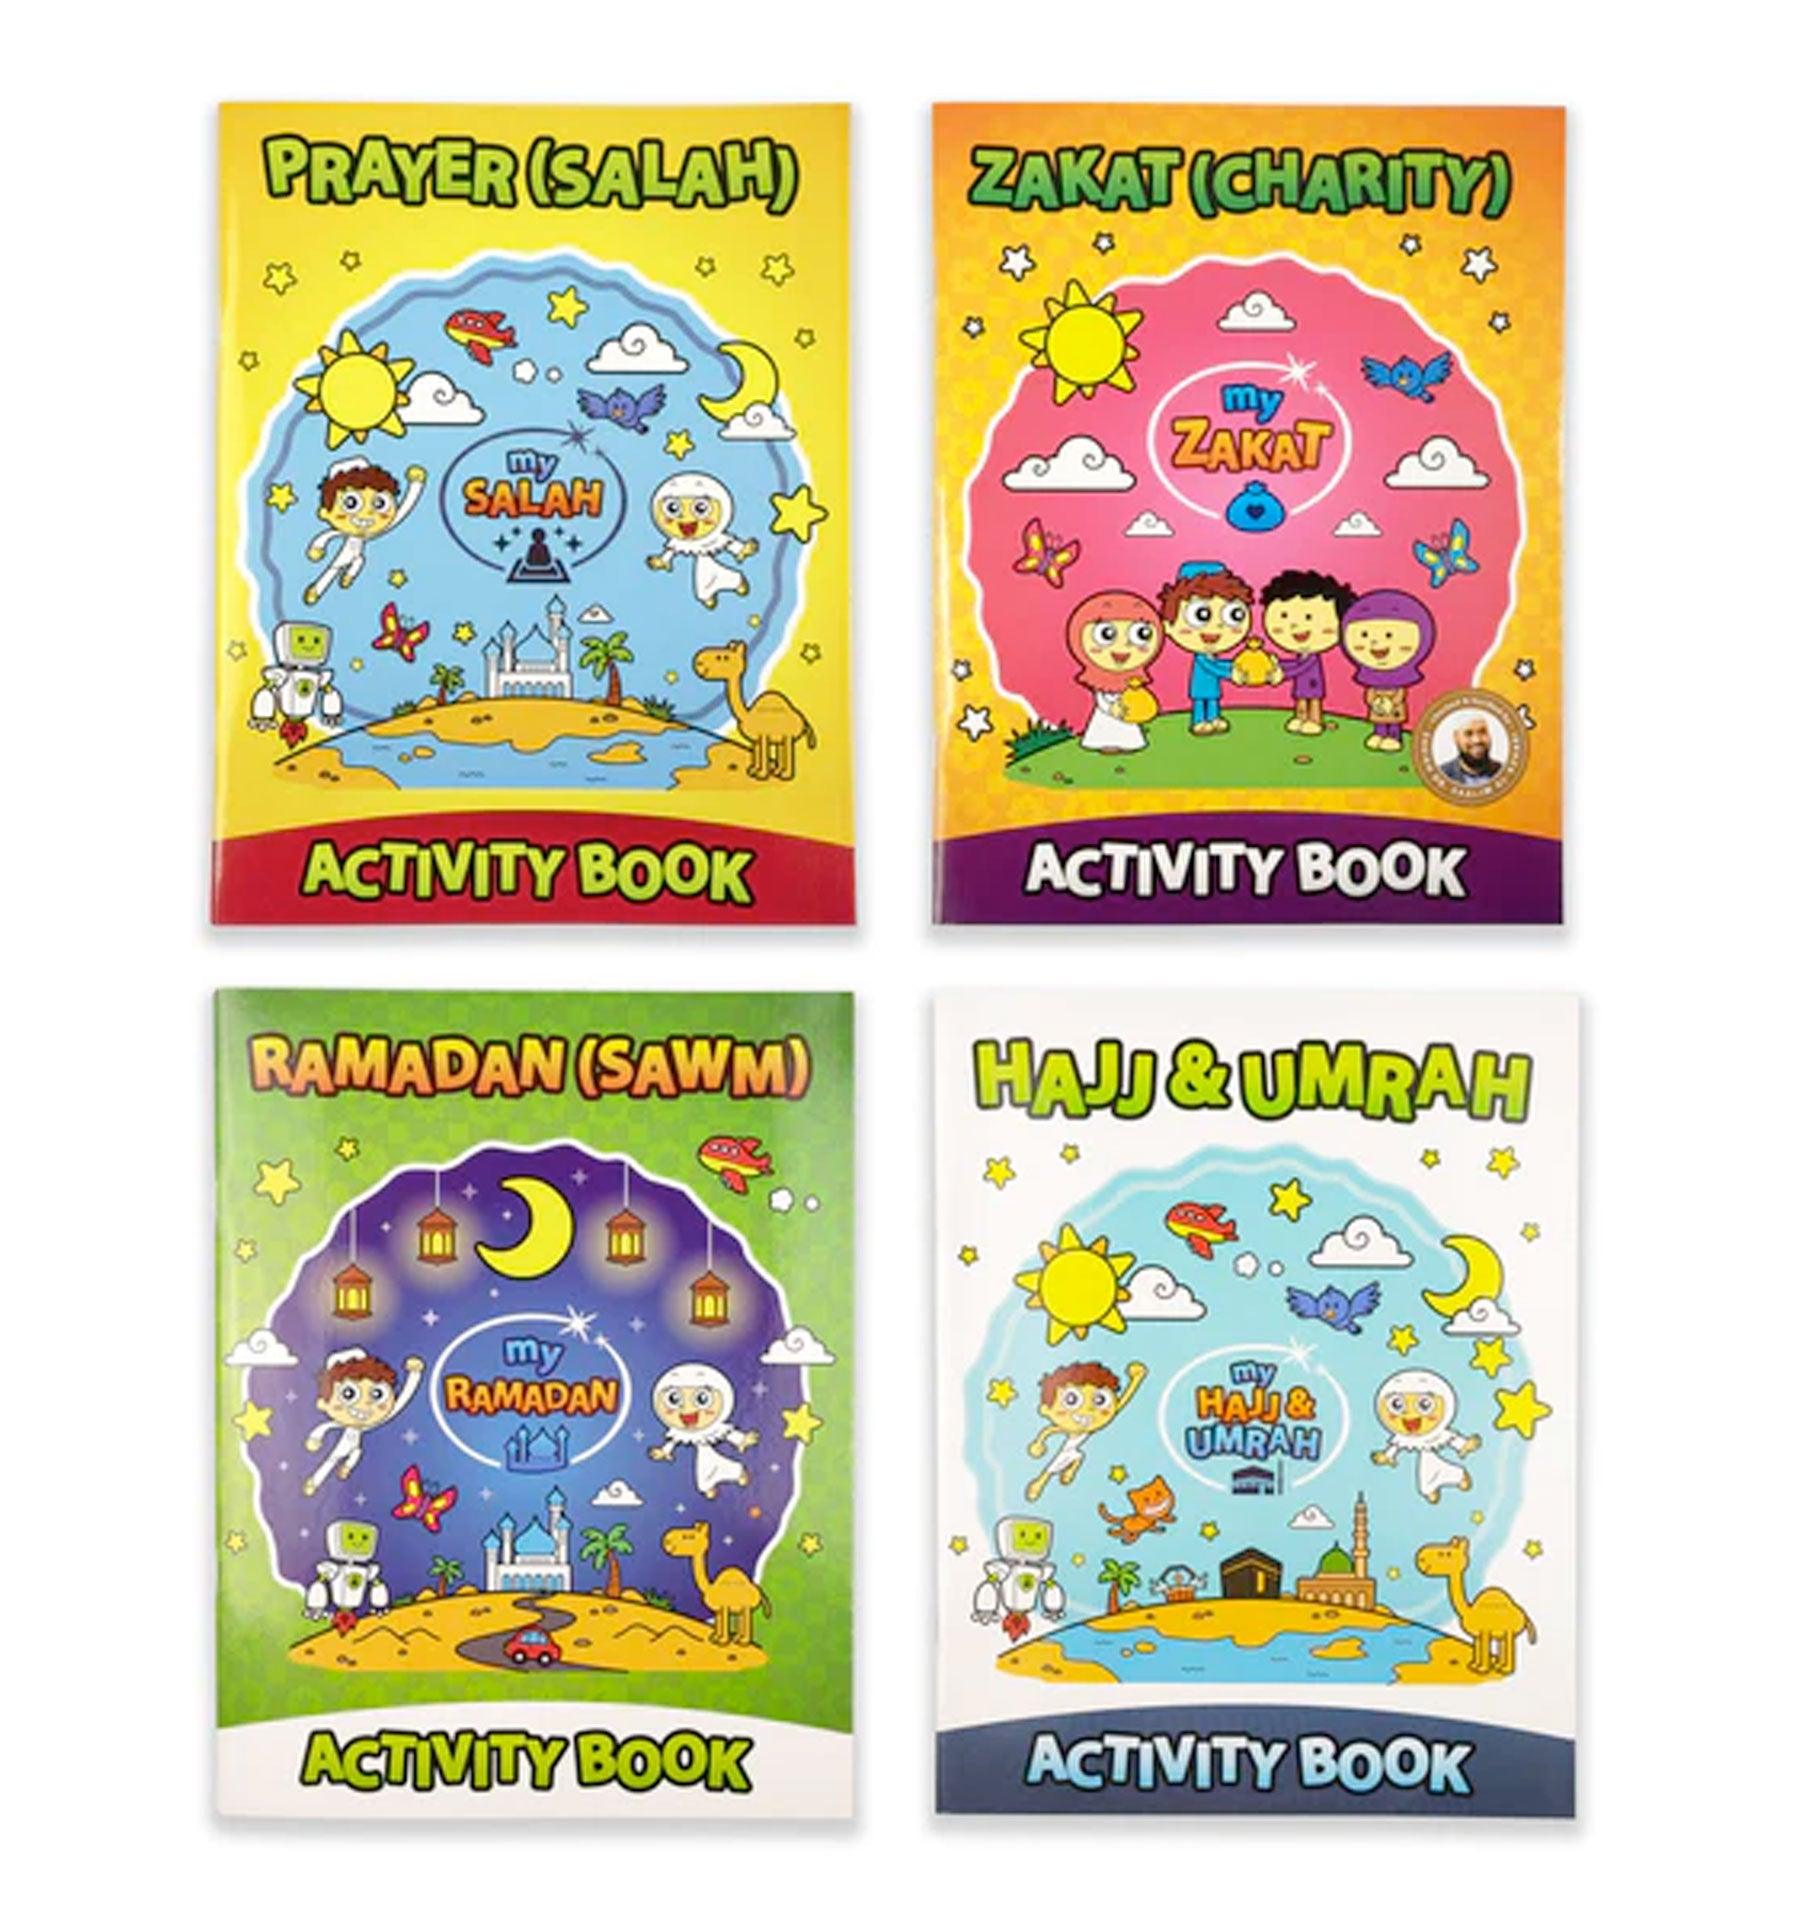 5 Pillars Activity Booklet Collection for Kids - Islamic Pixels